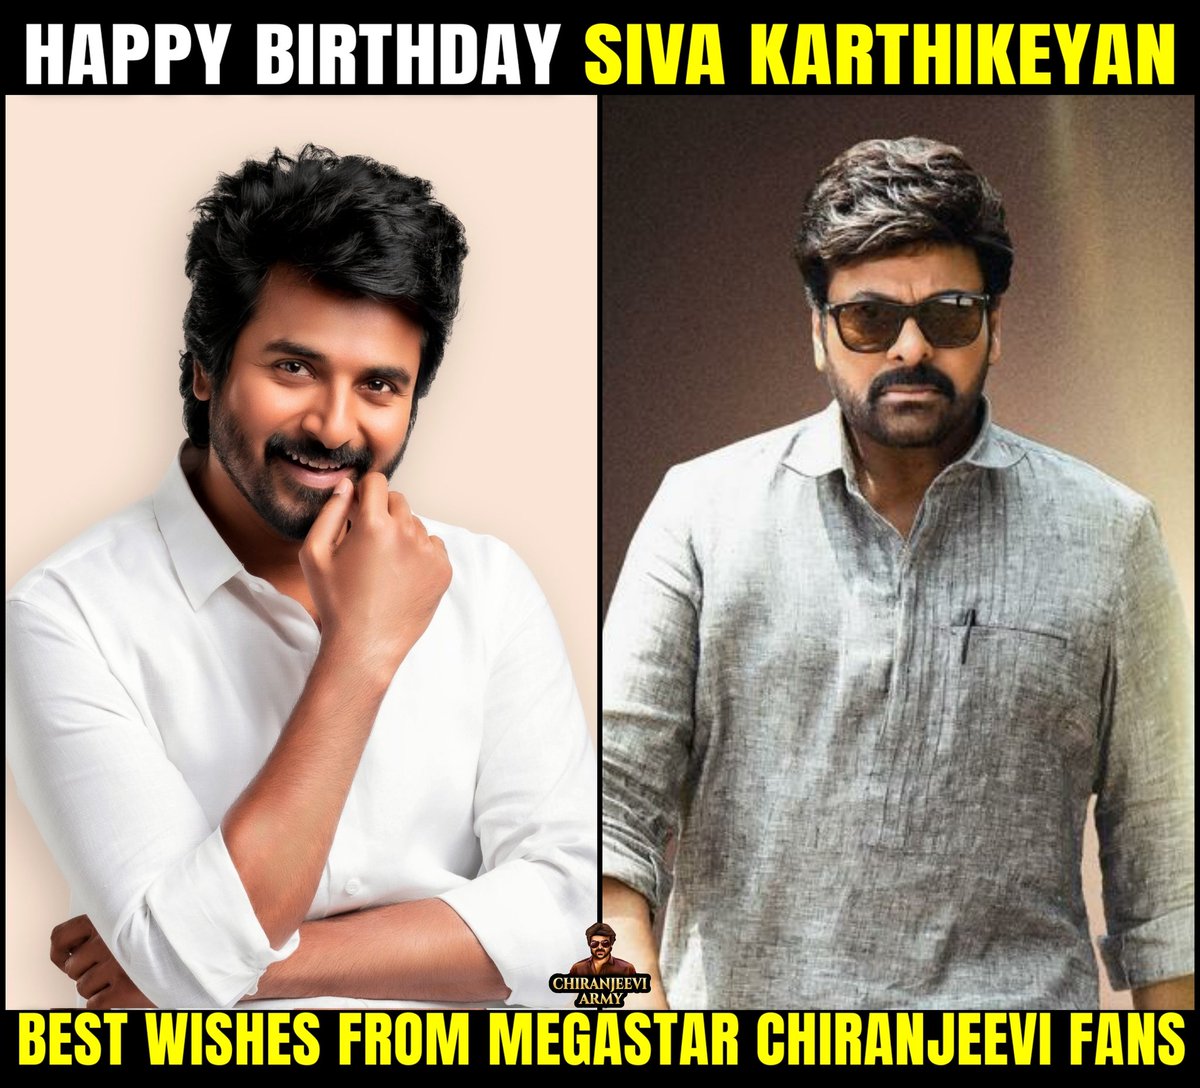 Wishing Prince @Siva_Kartikeyan a Very Happy Birthday 💐
Best Wishes for Your Upcoming Projects #Maaveeran #Ayalaan

Best Wishes From #MegaStarChiranjeevi @KChiruTweets Fans
#Chiranjeevi #Sivakarthikeyan

#HBDPrinceSK
#HBDSivakarthikeyan #HappyBirthdaySivakarthikeyan